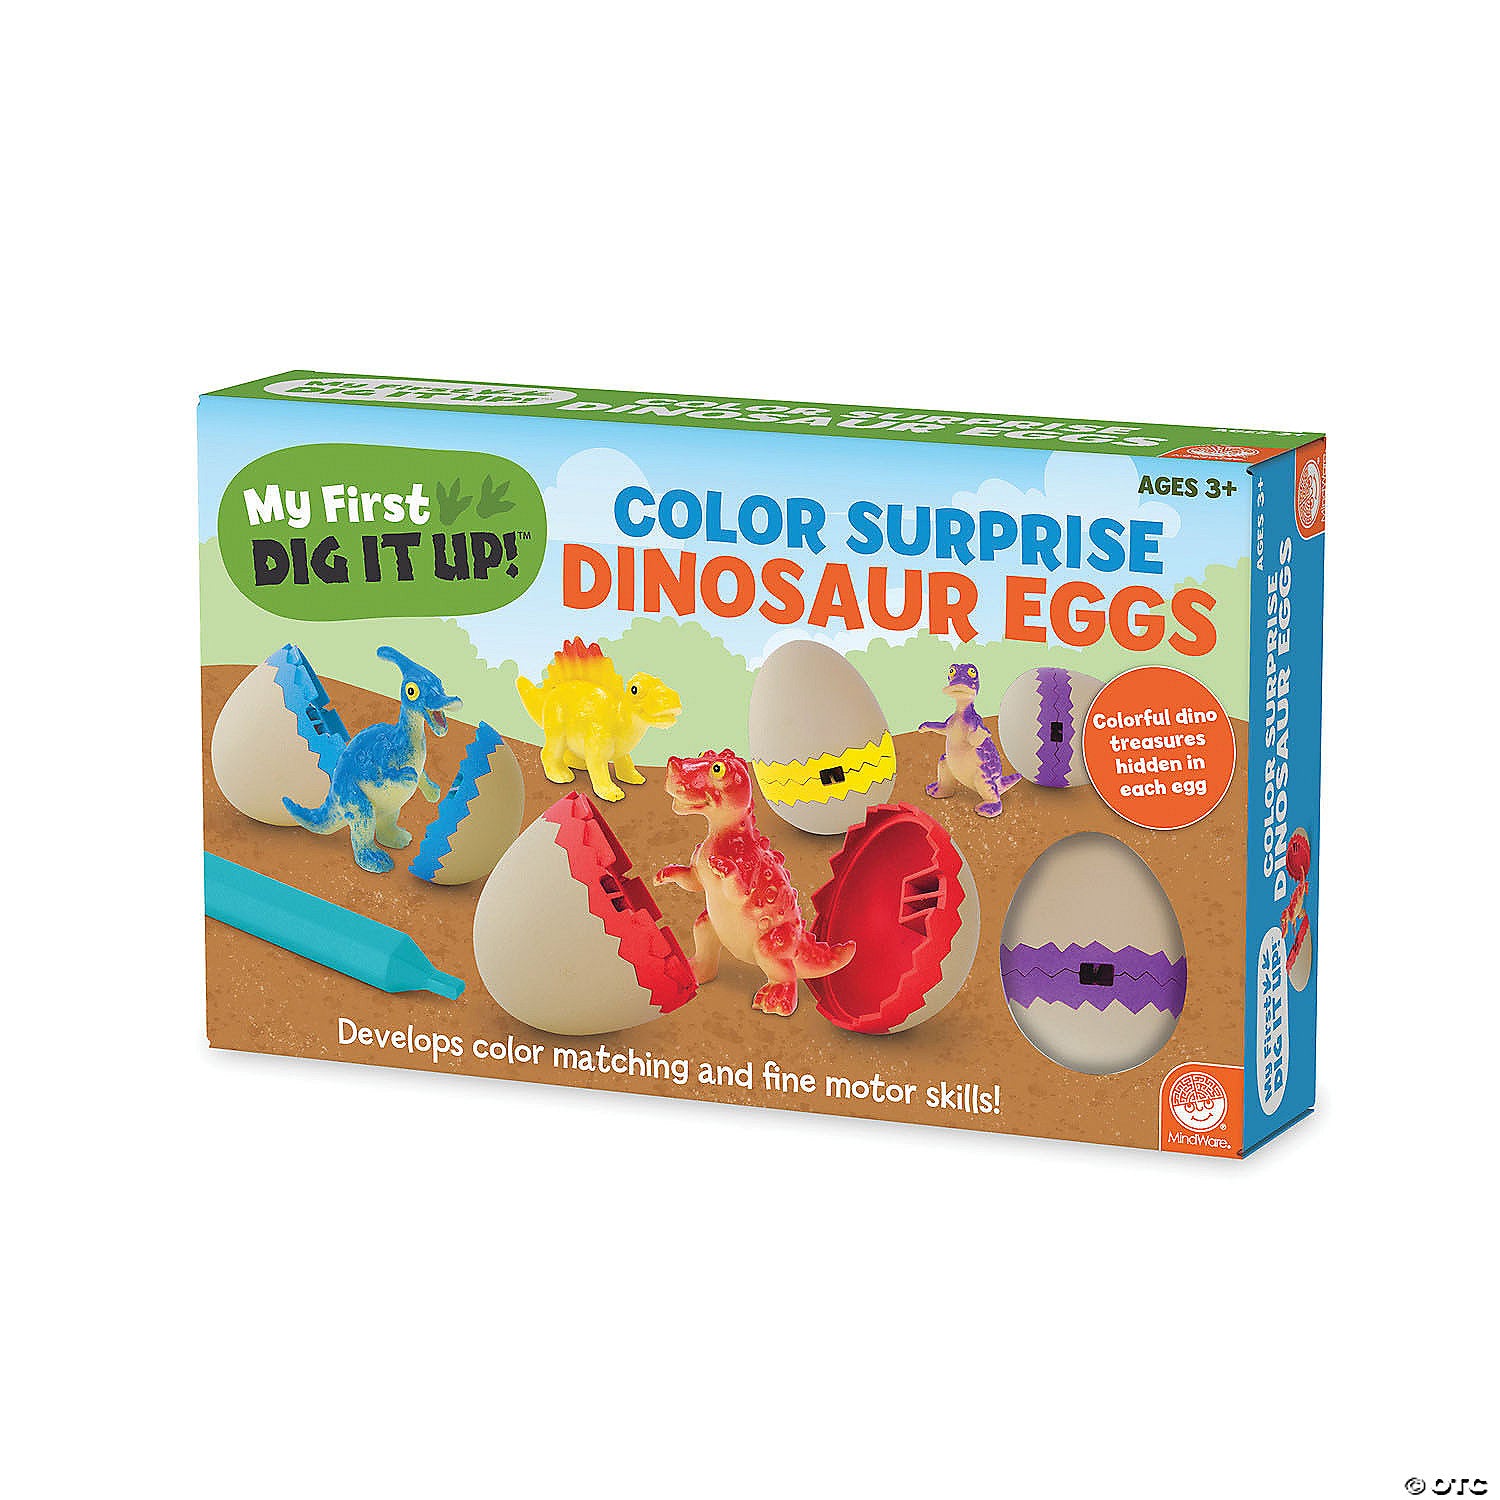 My First Dig It Up: Color Surprise Dinosaur Eggs by Mindware #13993221LL4521